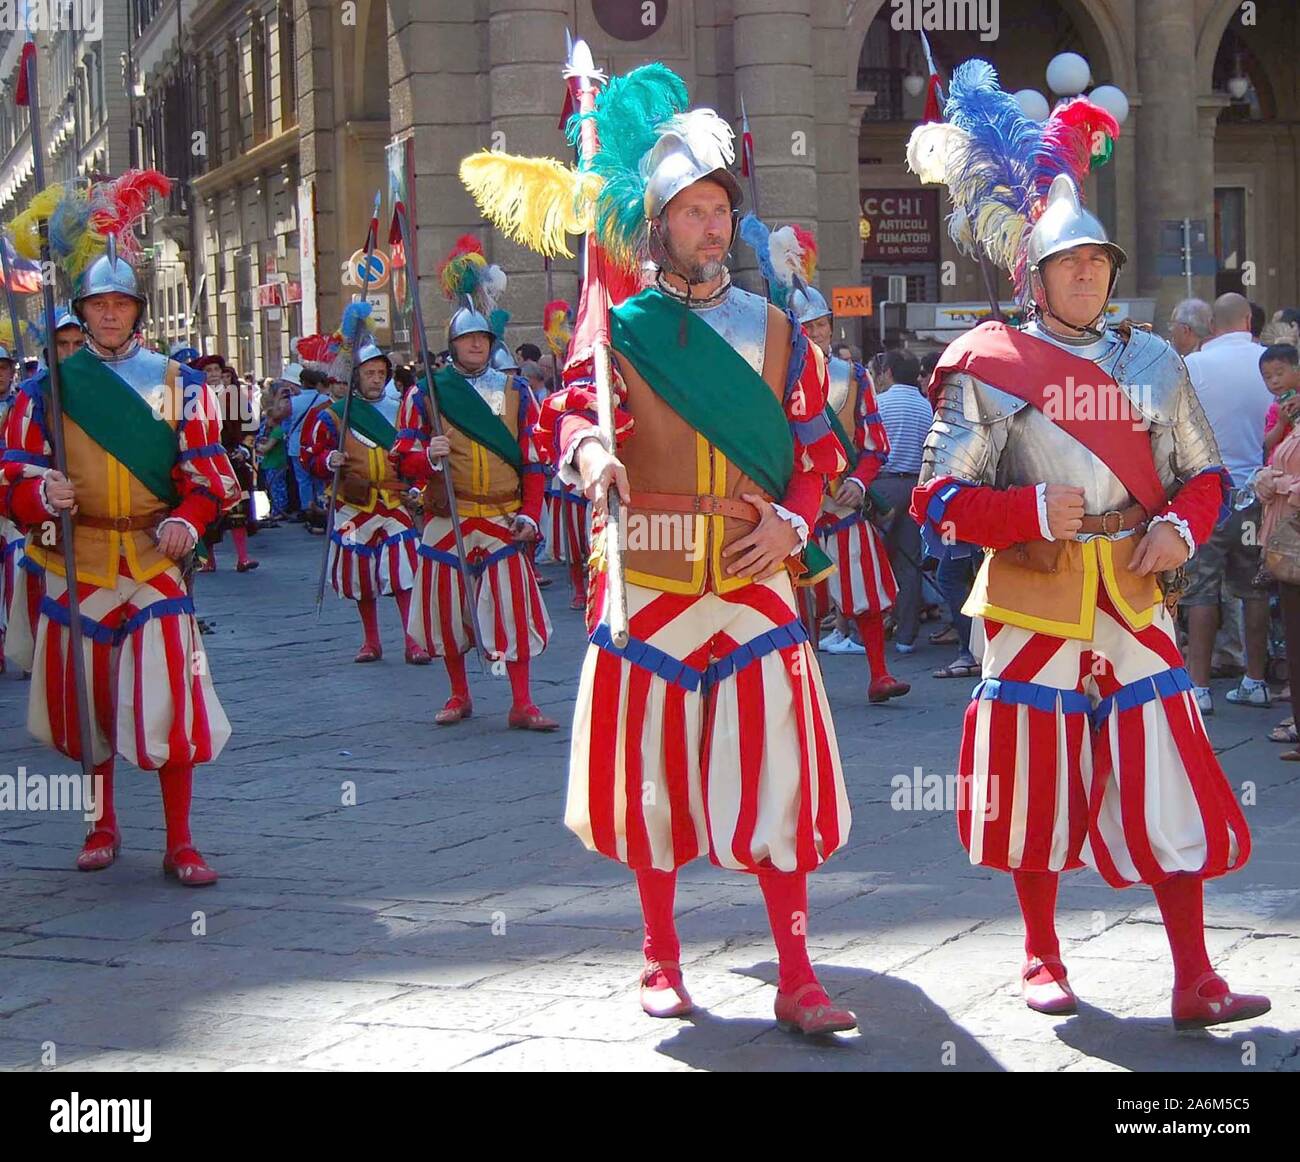 Players wearing traditional costumes, taking part in a parade for the Calcio Storico football tournament in Florence, Italy, June 2011. Stock Photo